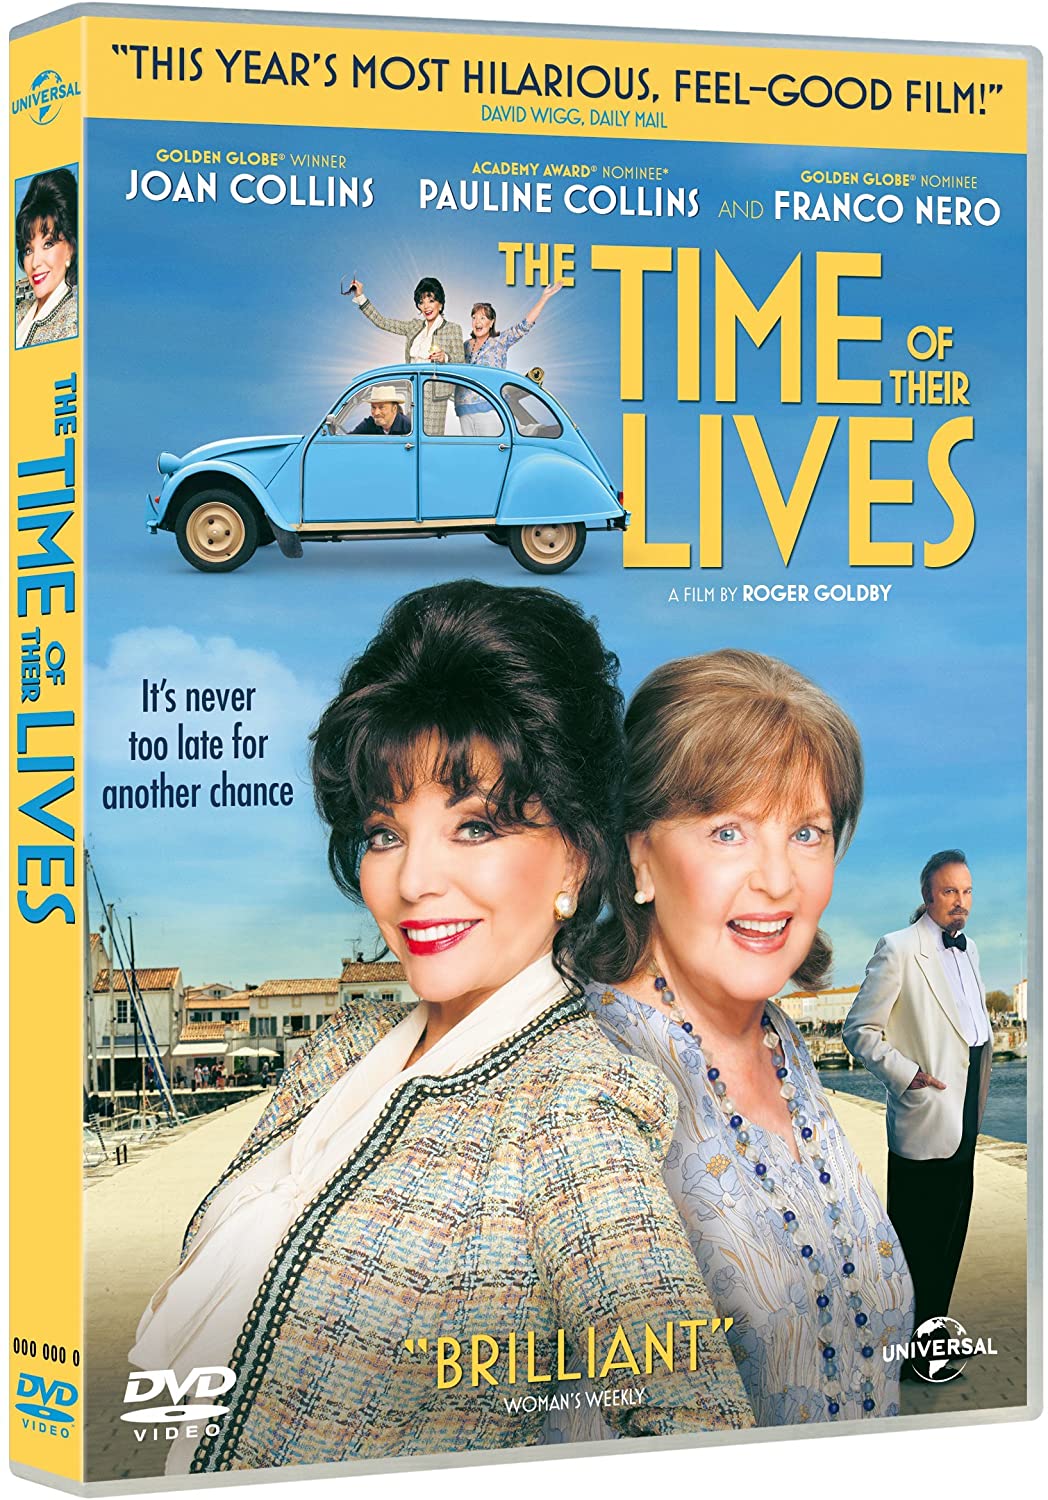 The Time of Their Lives [2017] - Comedy [DVD]